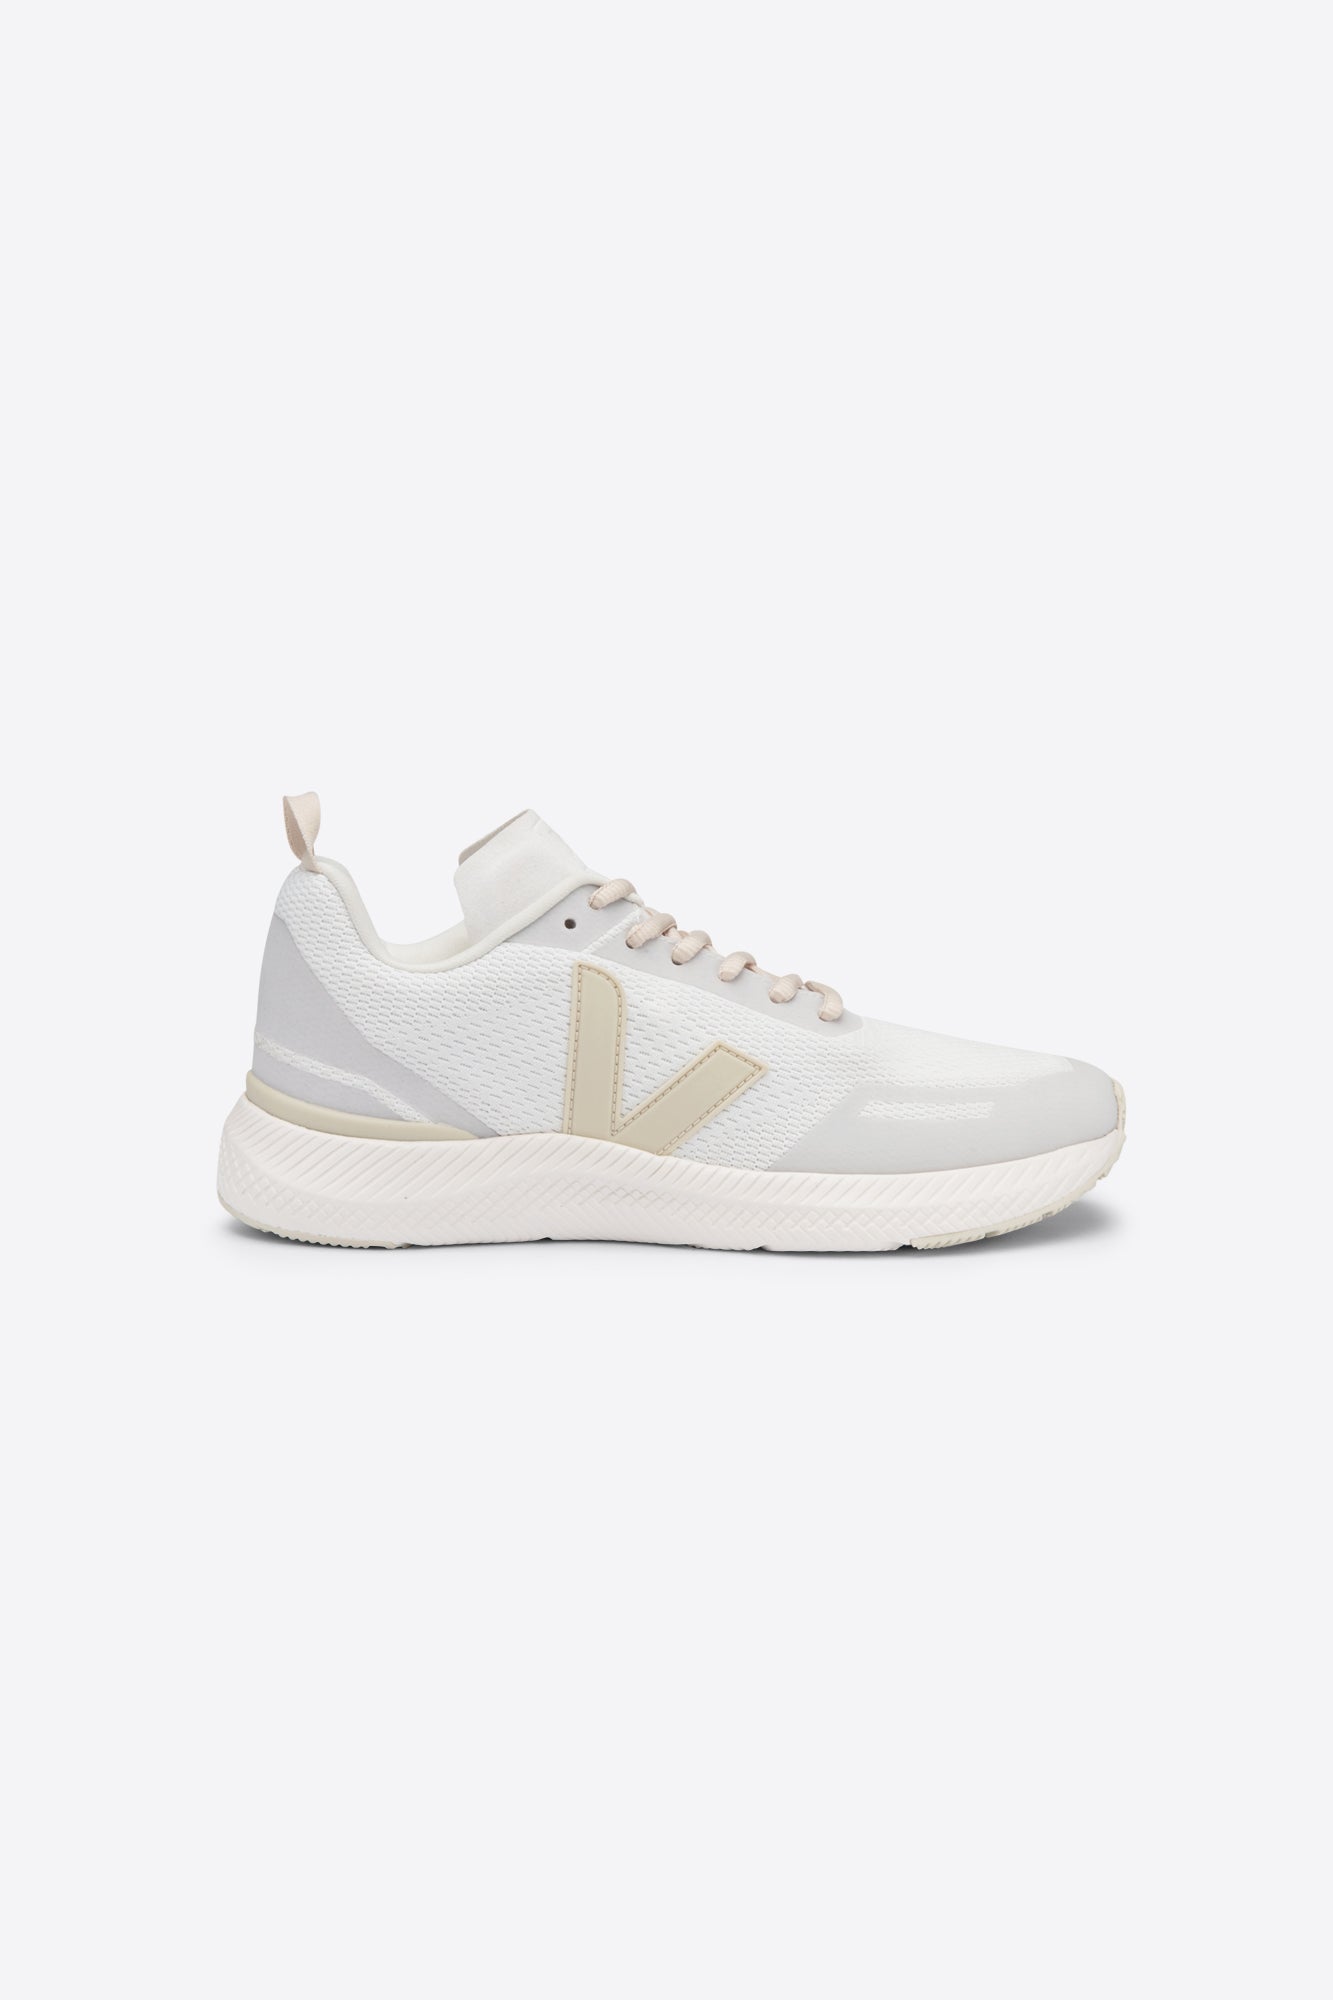 Veja W's Impala training shoe - Recycled Materials Eggshell Pierre Shoes